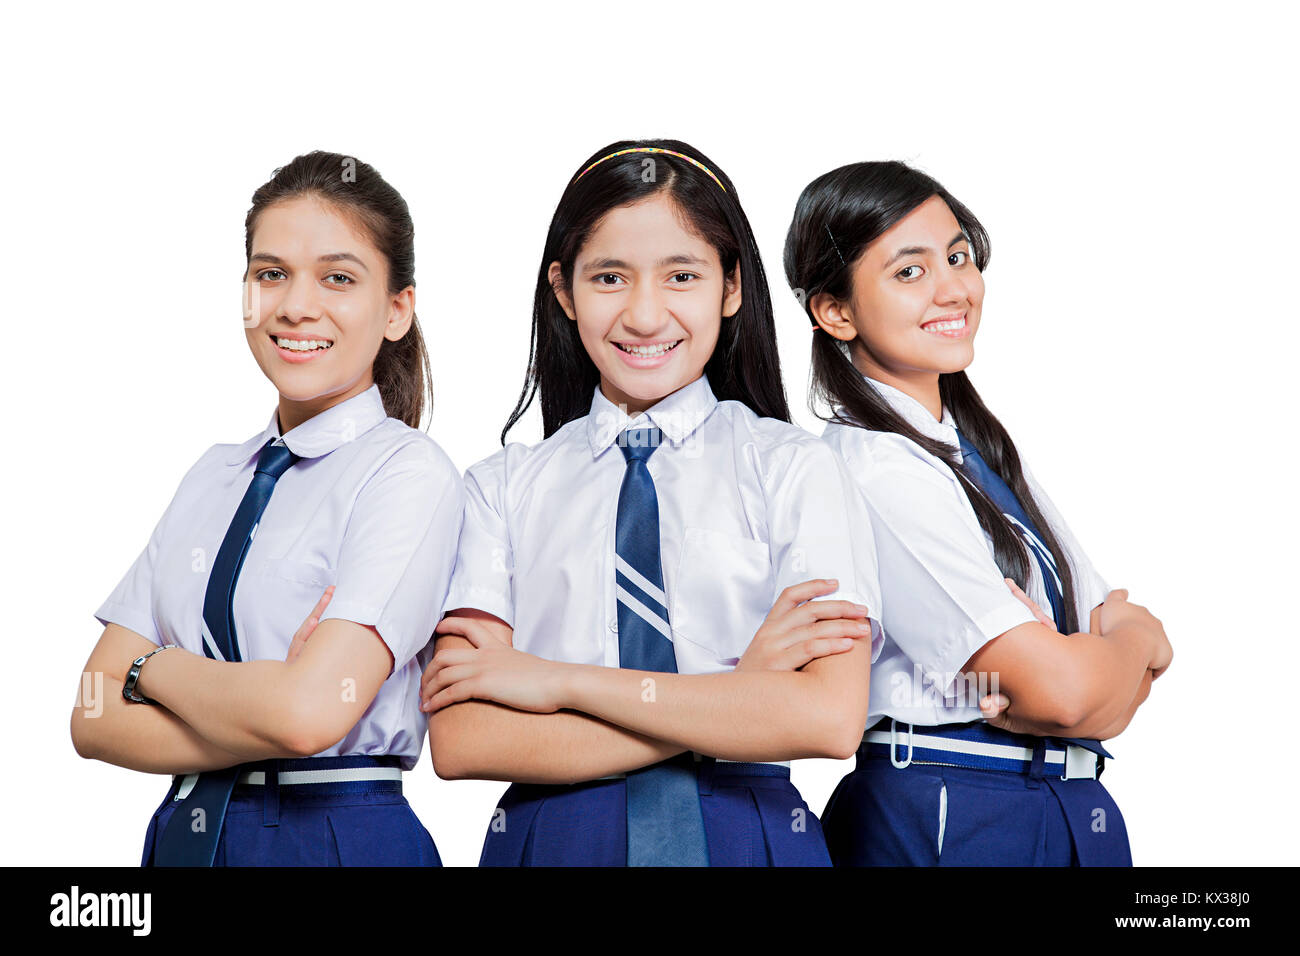 indian school student images